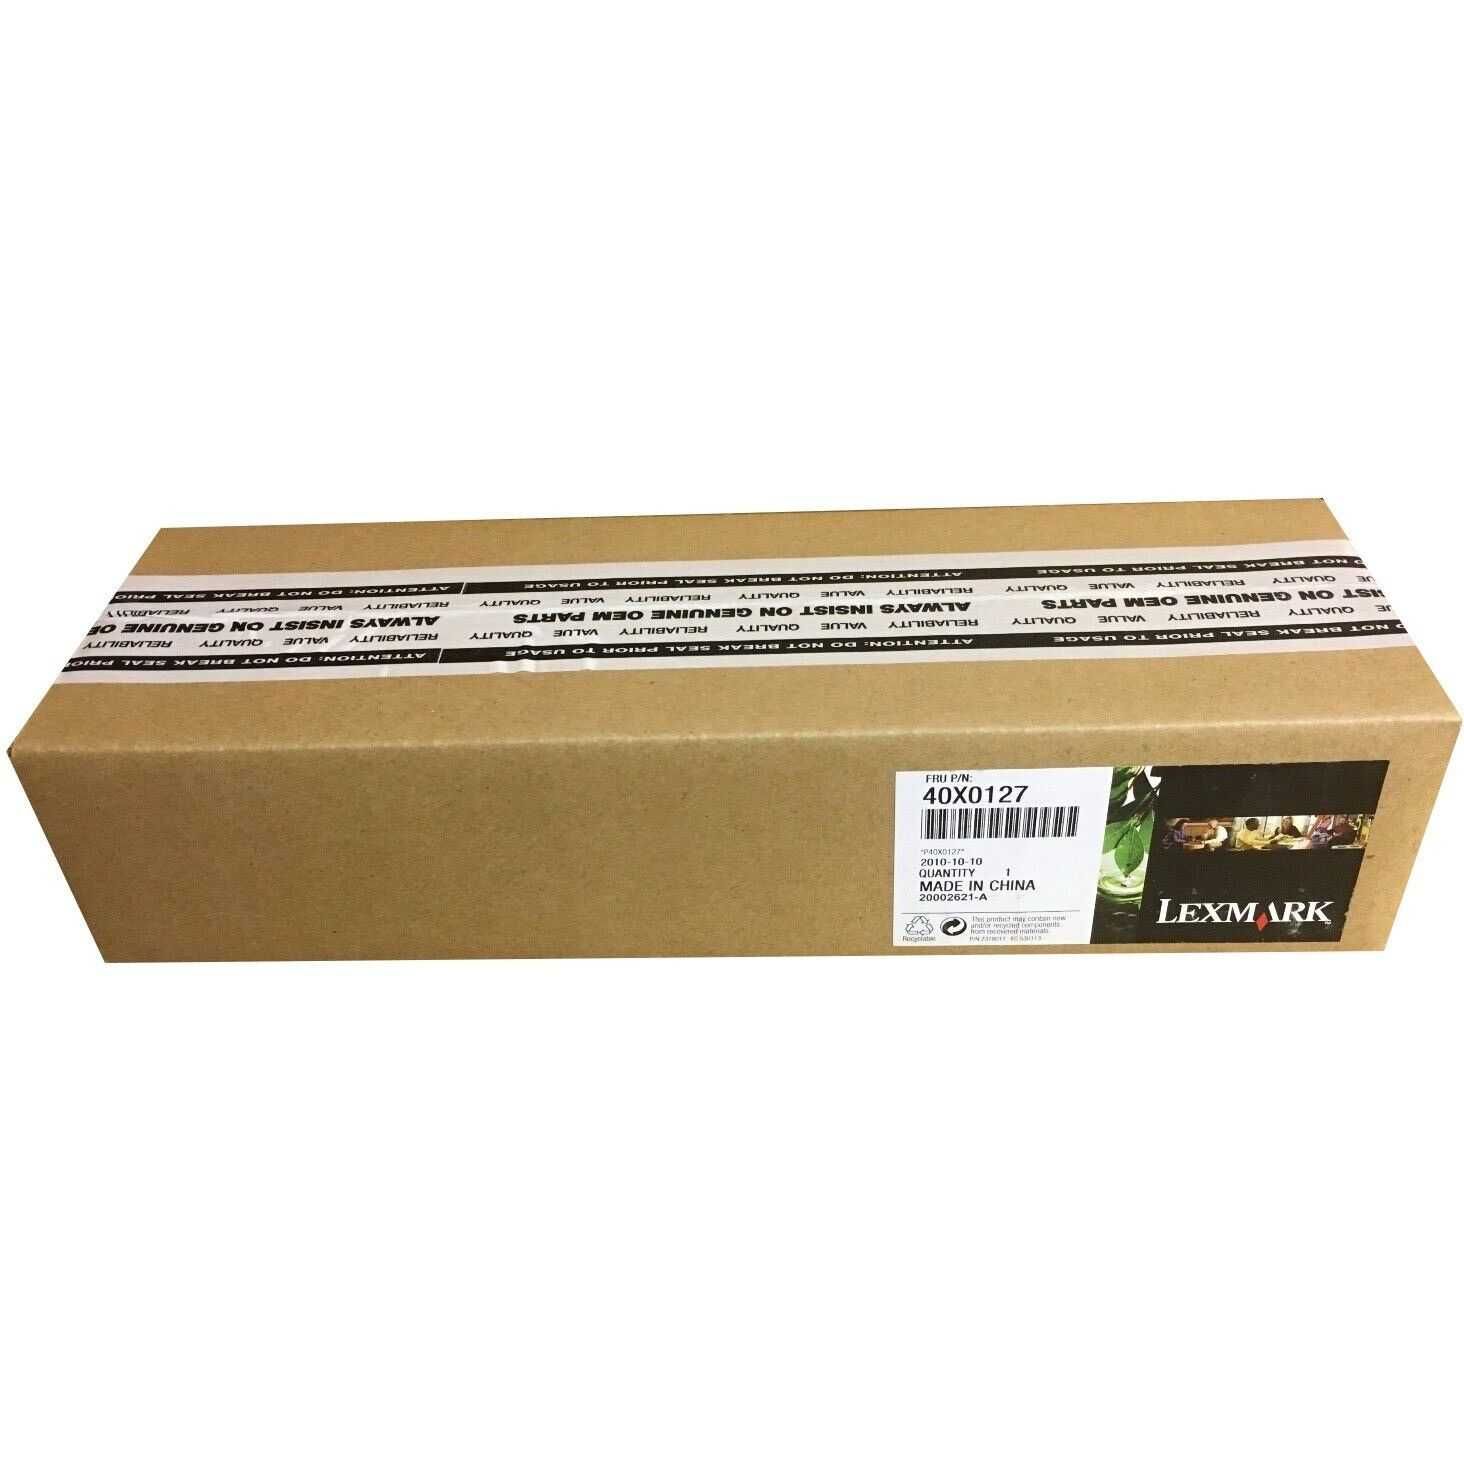 Lexmark T640 ansamblu role incarcare 40X0127 Charge Roller